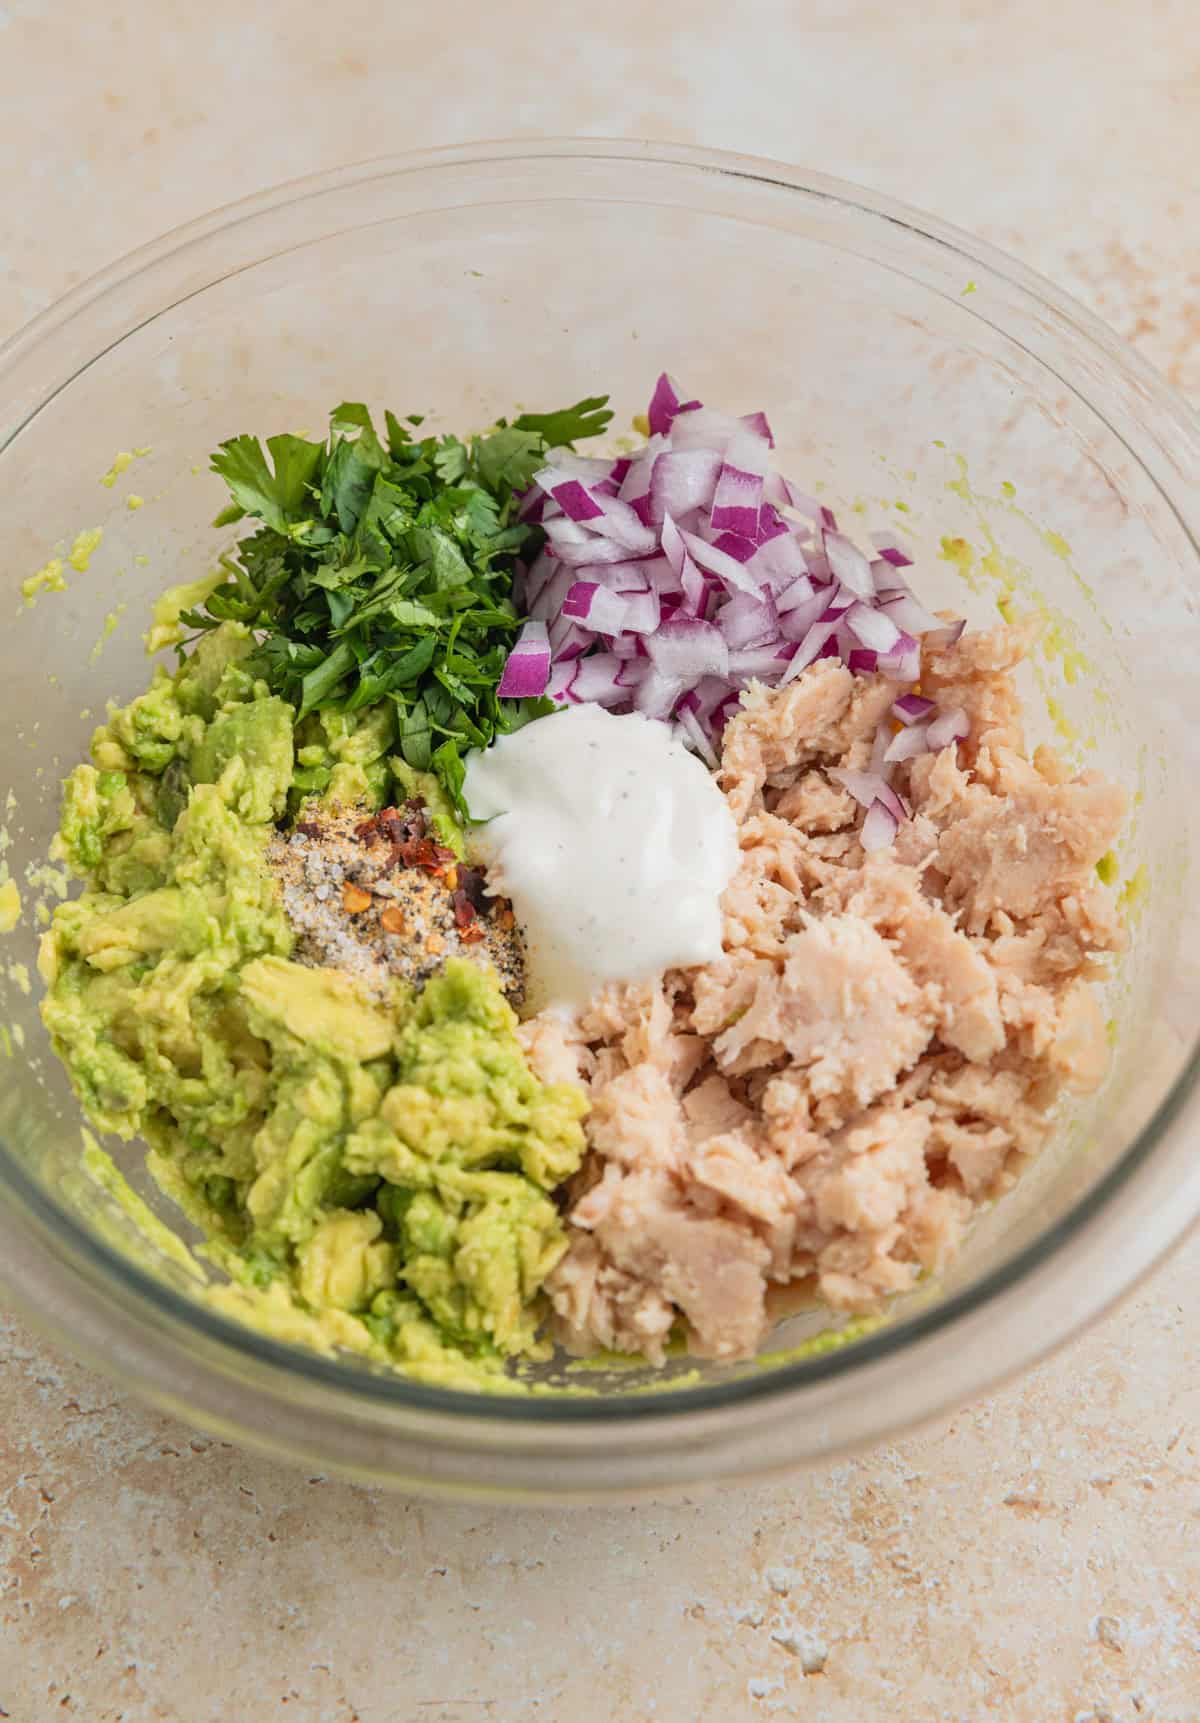 Flaked tuna, red onion, cilantro, avocado and Ranch dressing in mixing bowl before being stirred.